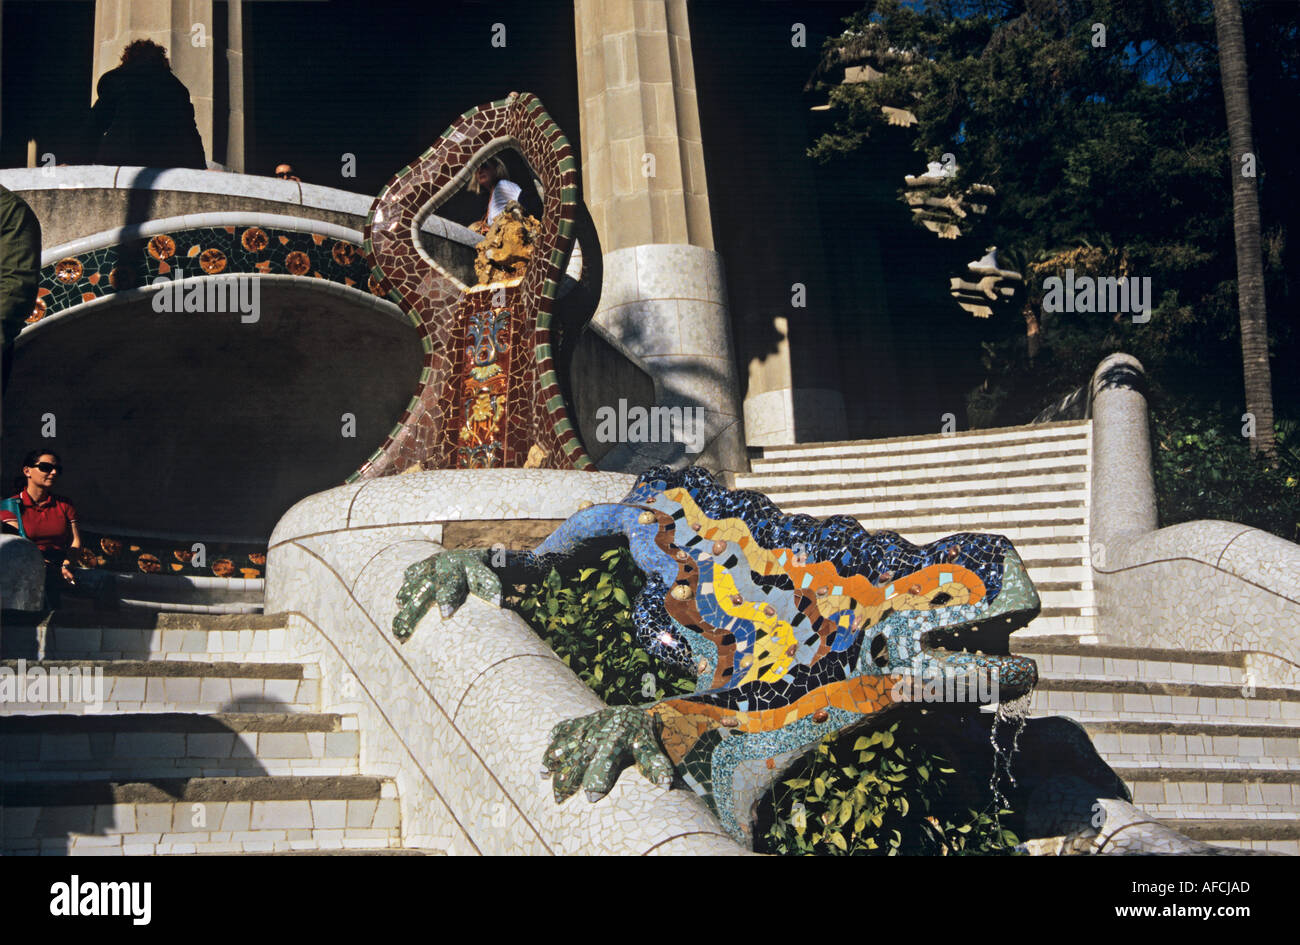 In Park Güell created by Antoni Gaudí a salamander adorns the stairway to a pillared hall and plaza Stock Photo